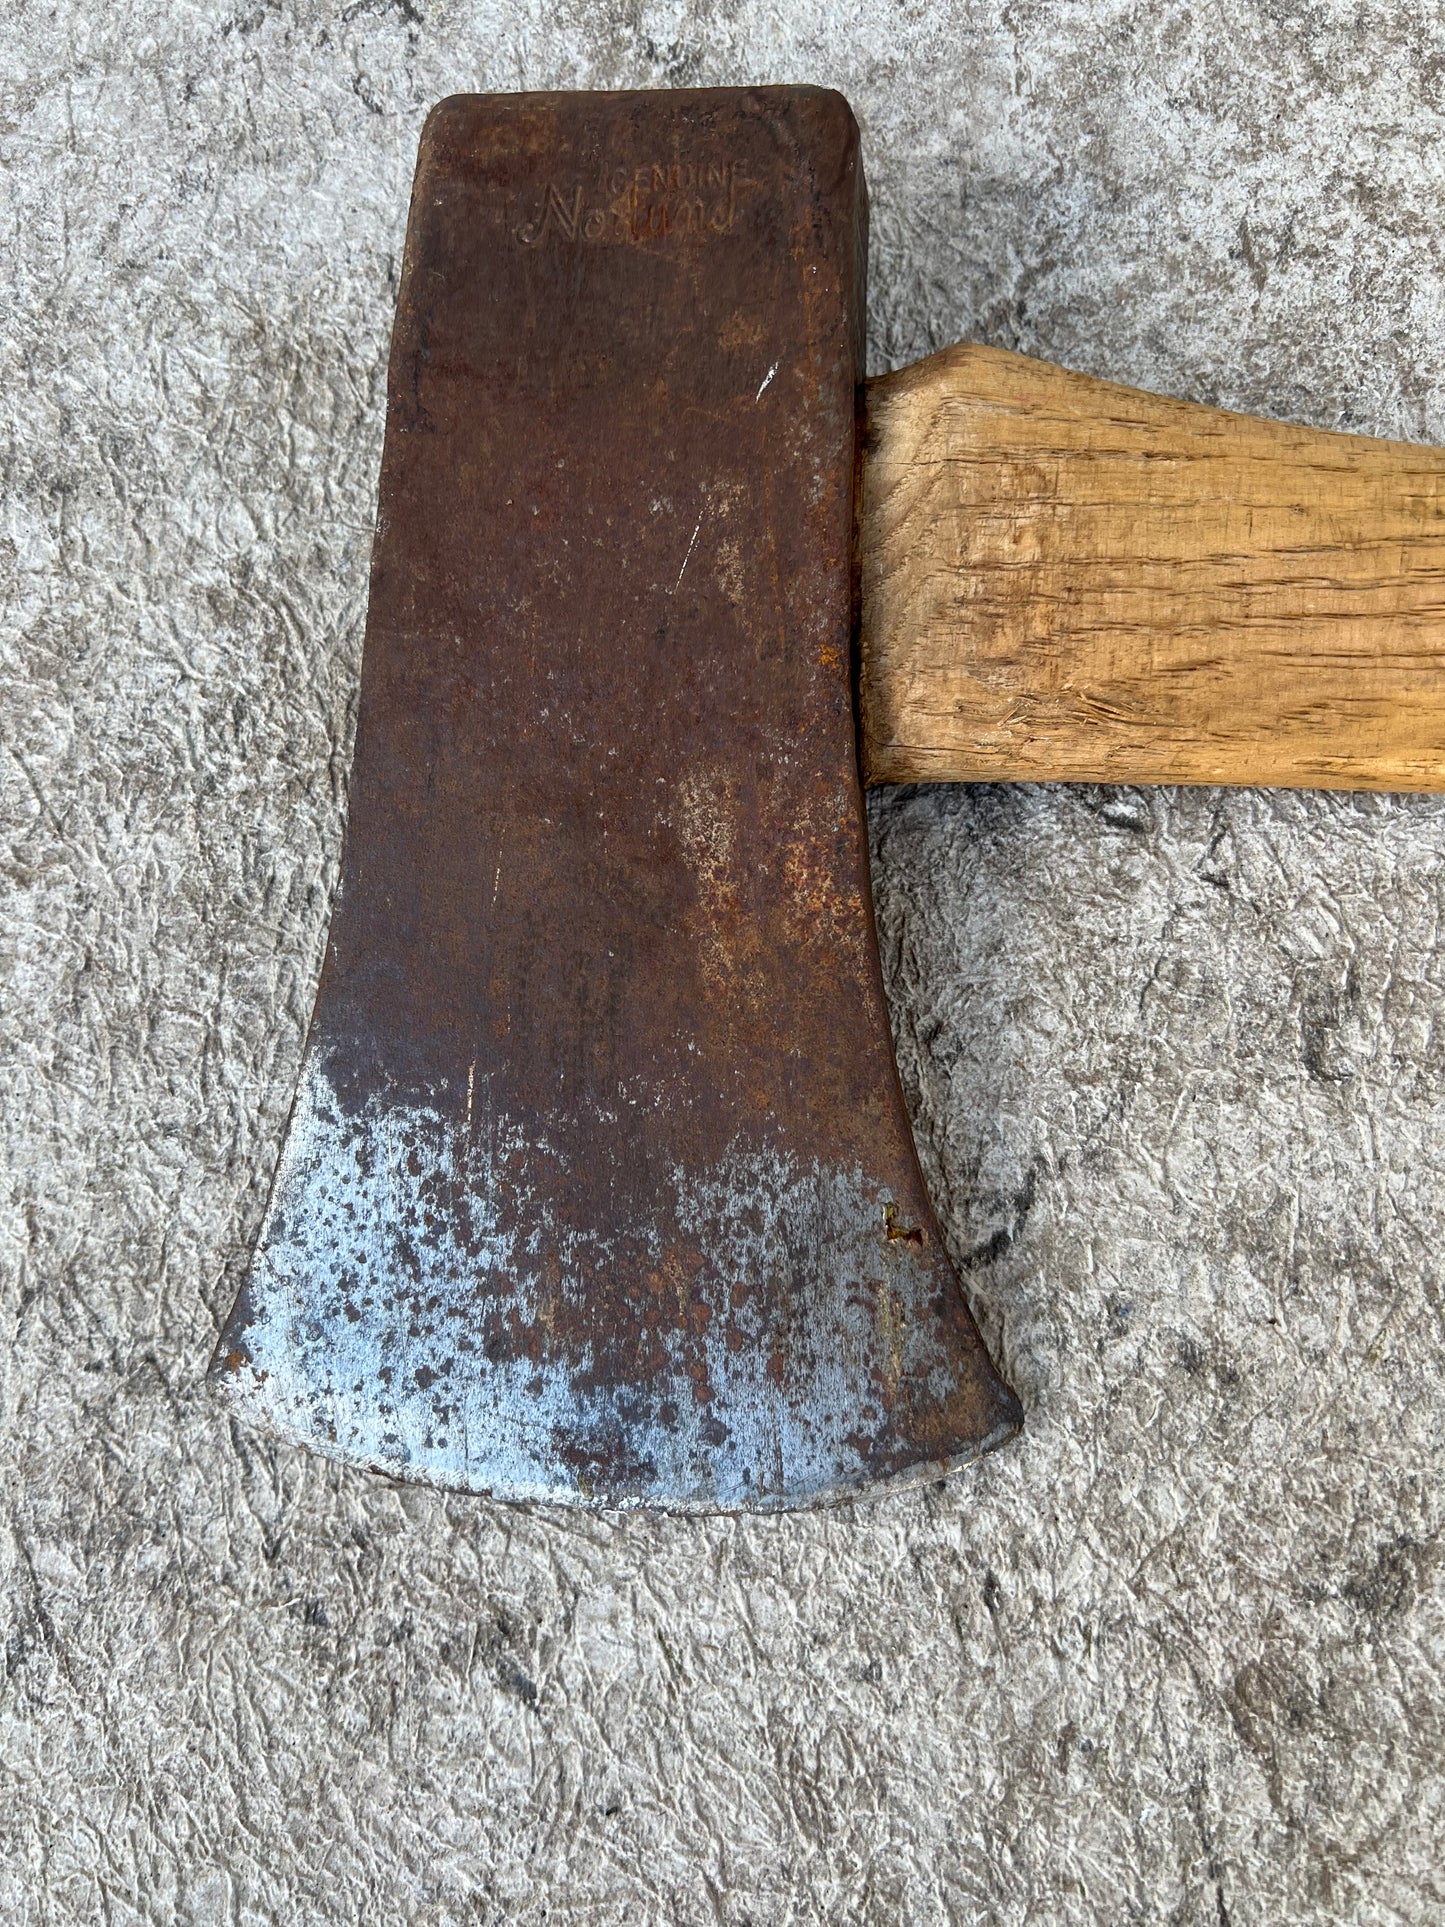 Axe Vintage Norlund Hudson Bay Tomahawk Pattern Log Splitter 36 inch Solid Heavy Wood Chopping Camping Hunting